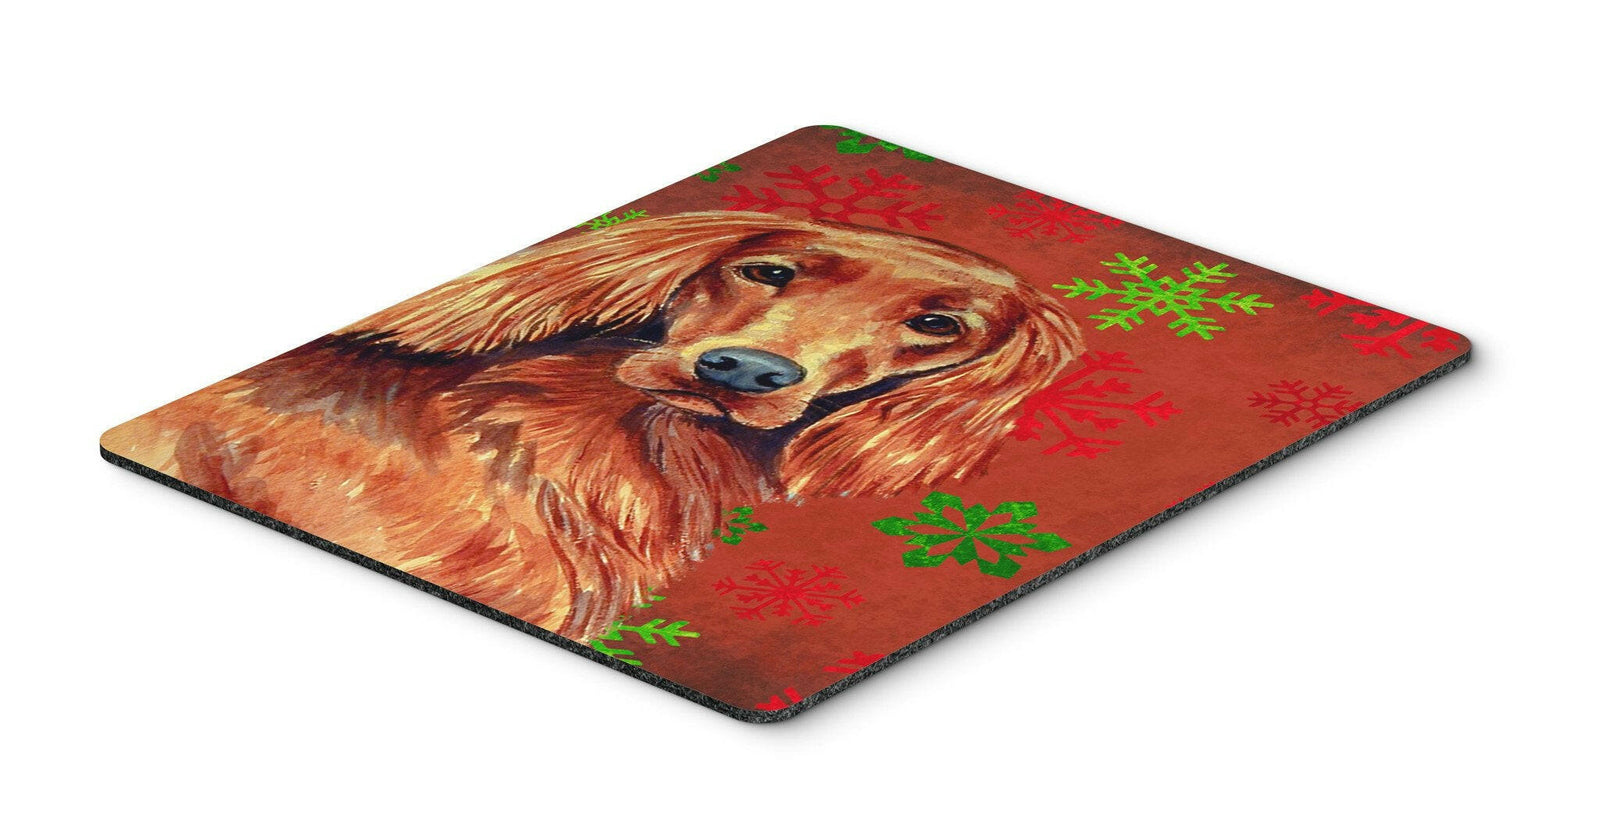 Irish Setter Red and Green Snowflakes Christmas Mouse Pad, Hot Pad or Trivet by Caroline's Treasures